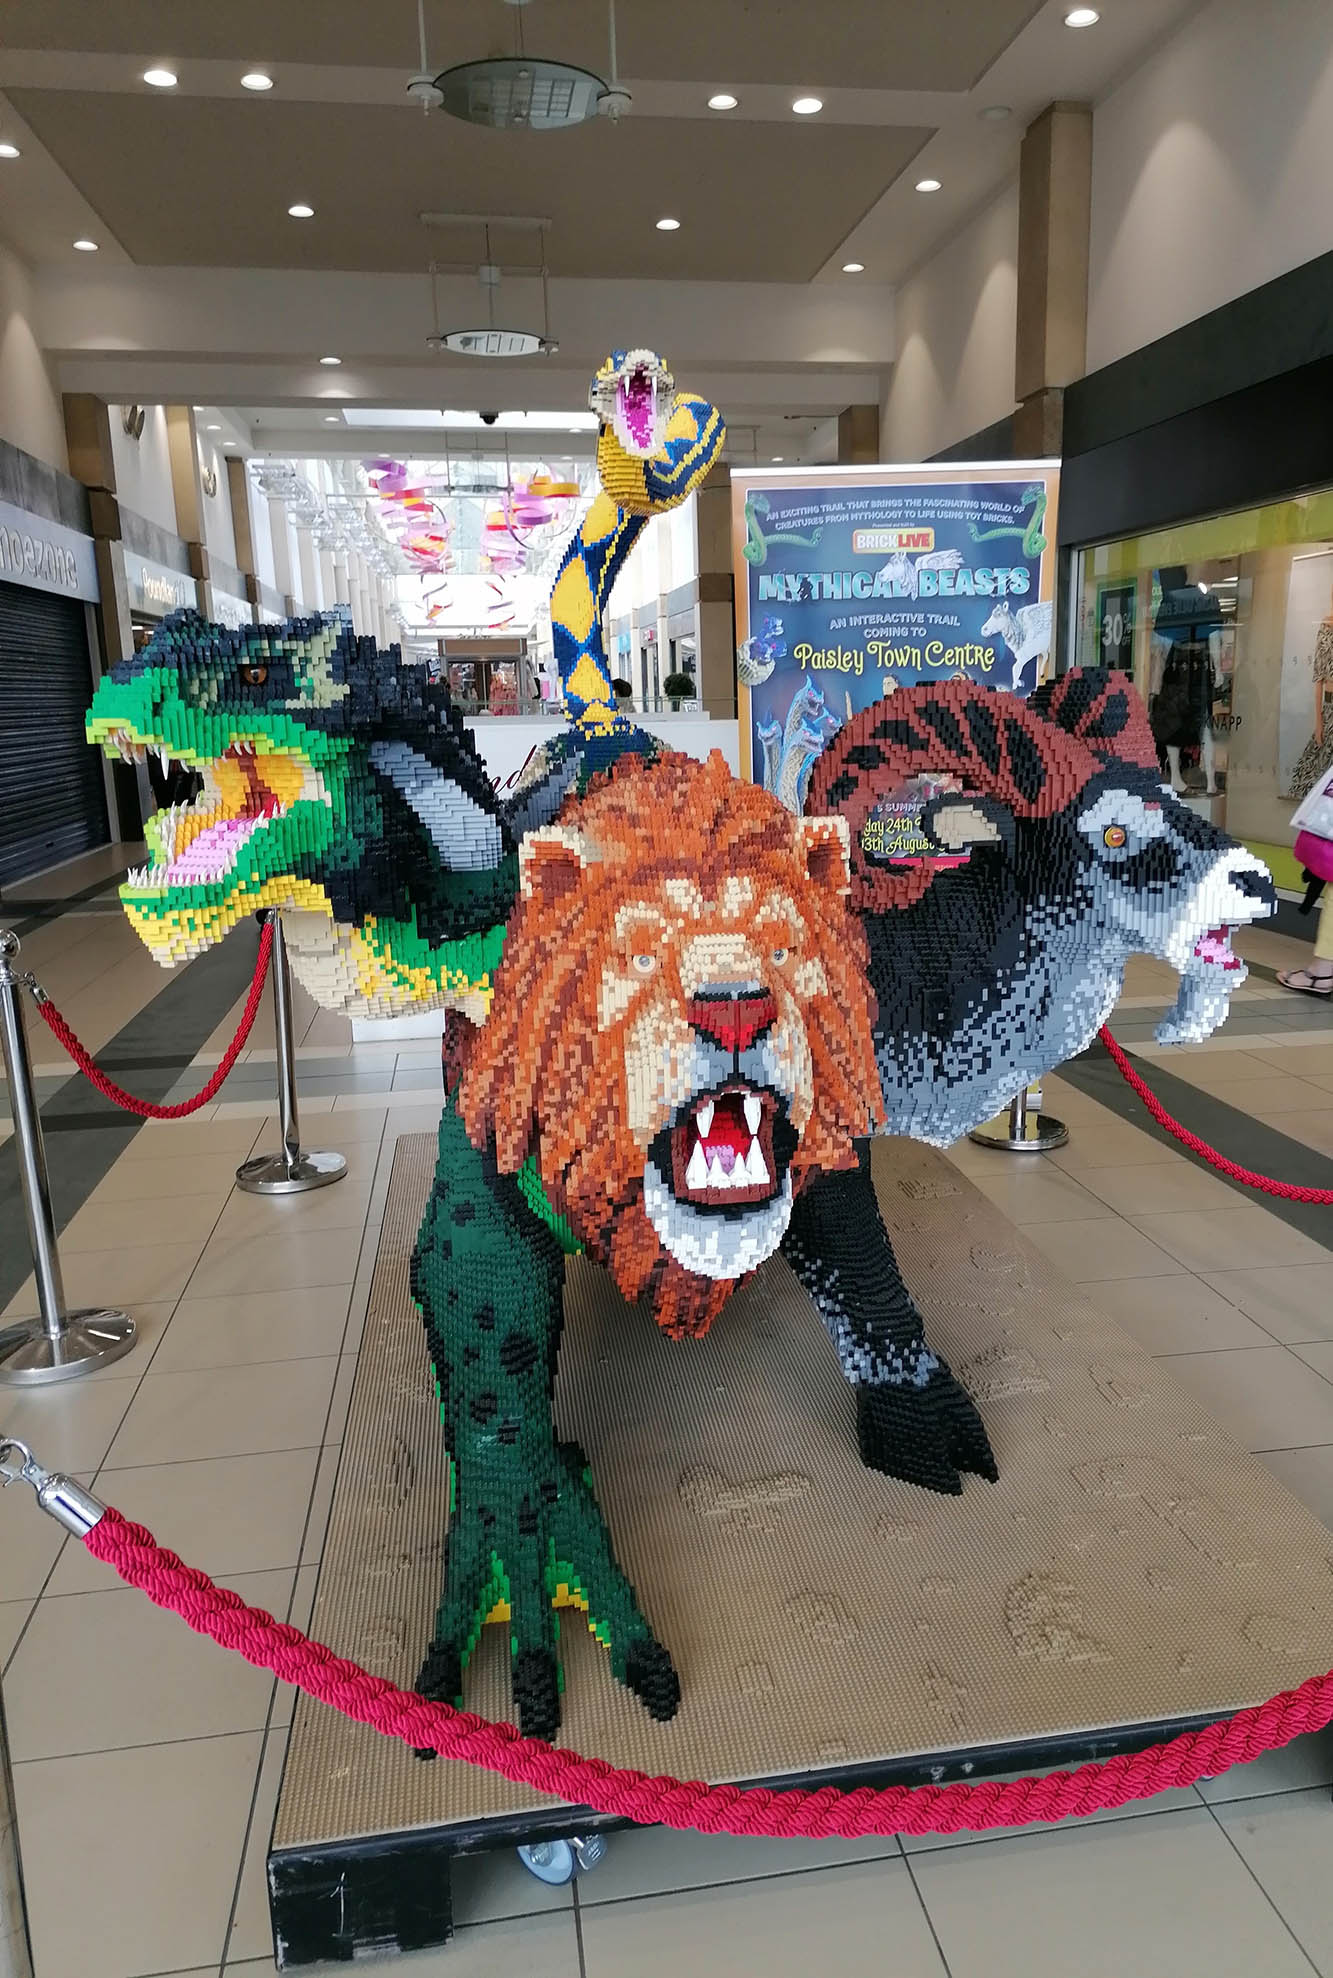 BRICKLIVE’s Mythical Beasts